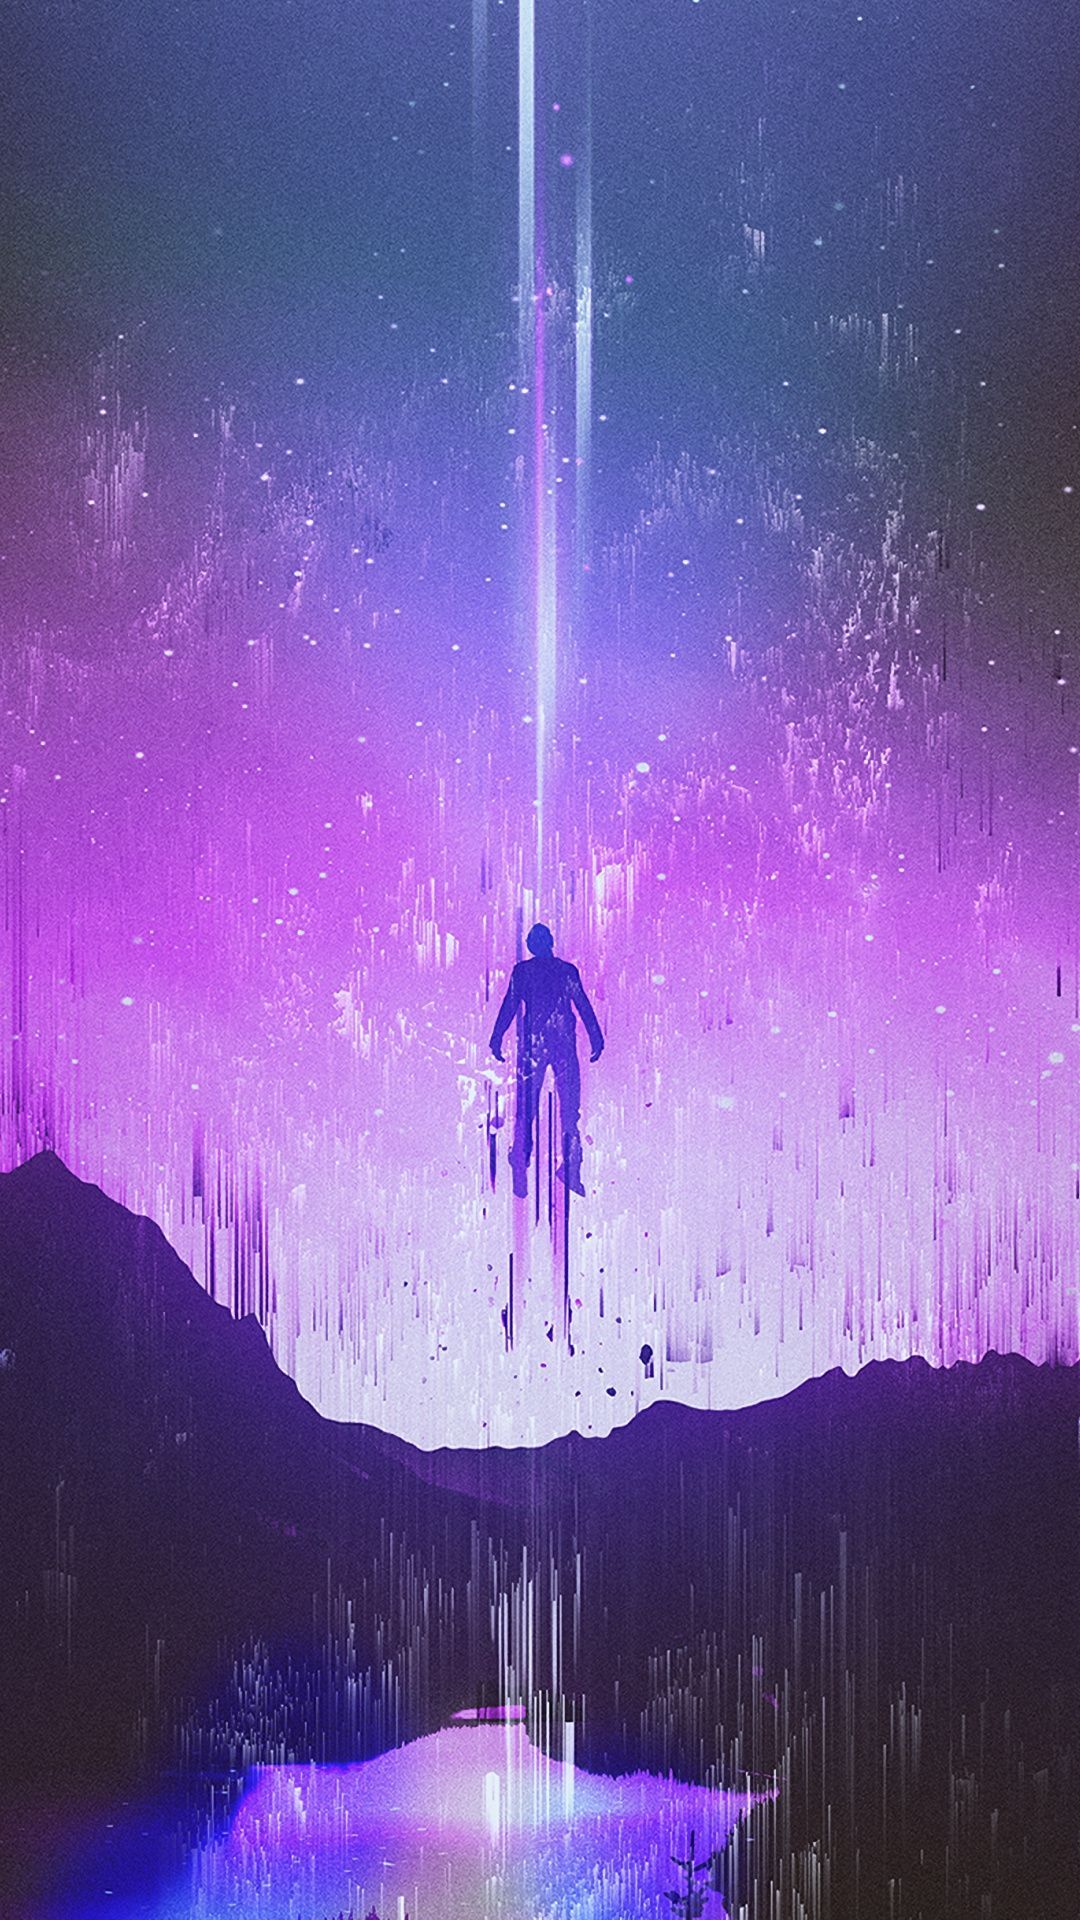 Anime Glitch Art Wallpapers - Wallpaper Cave